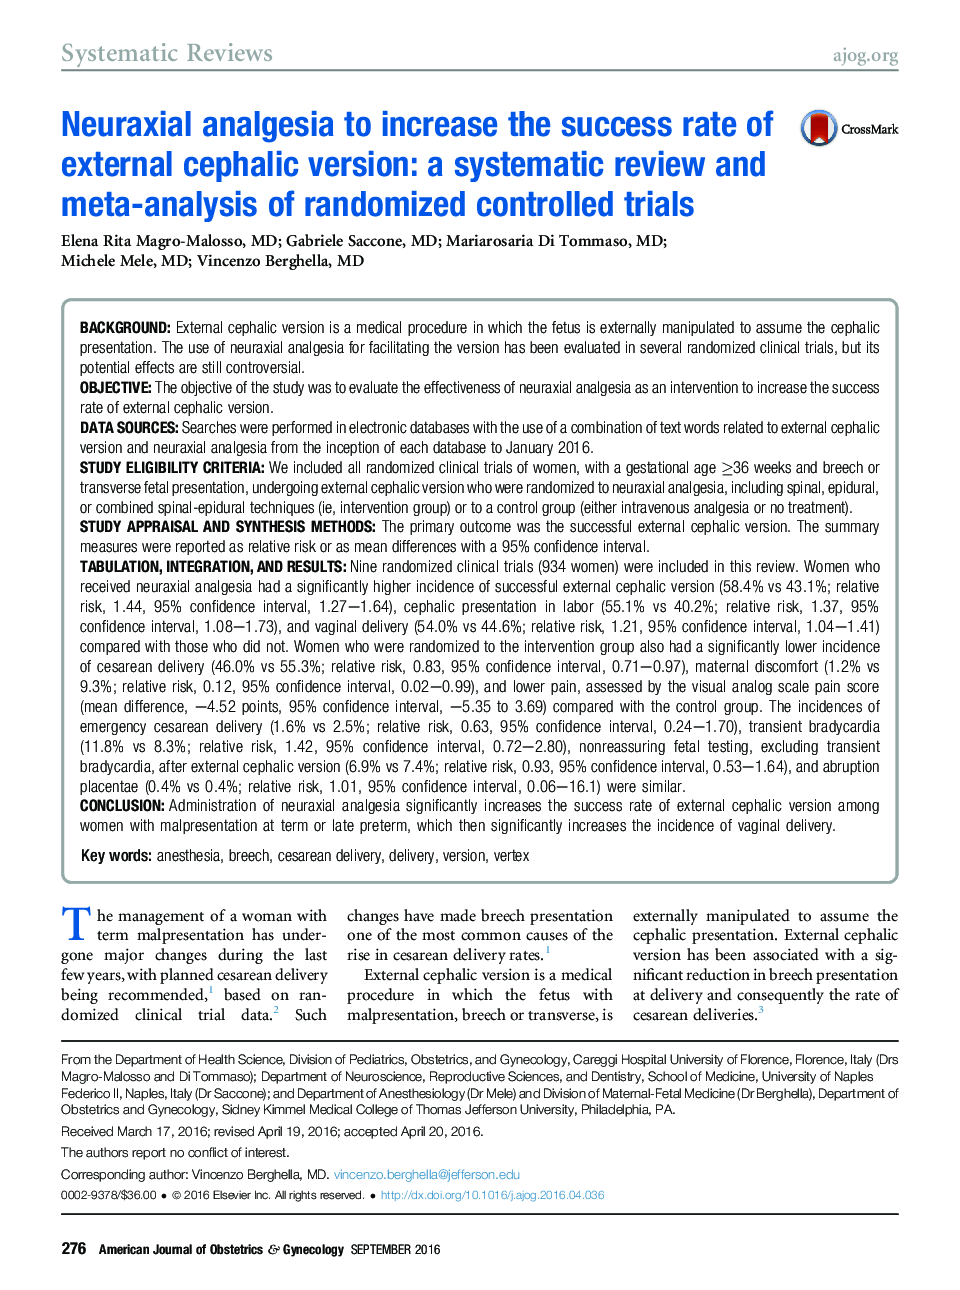 Neuraxial analgesia to increase the success rate of external cephalic version: a systematic review and meta-analysis of randomized controlled trials 